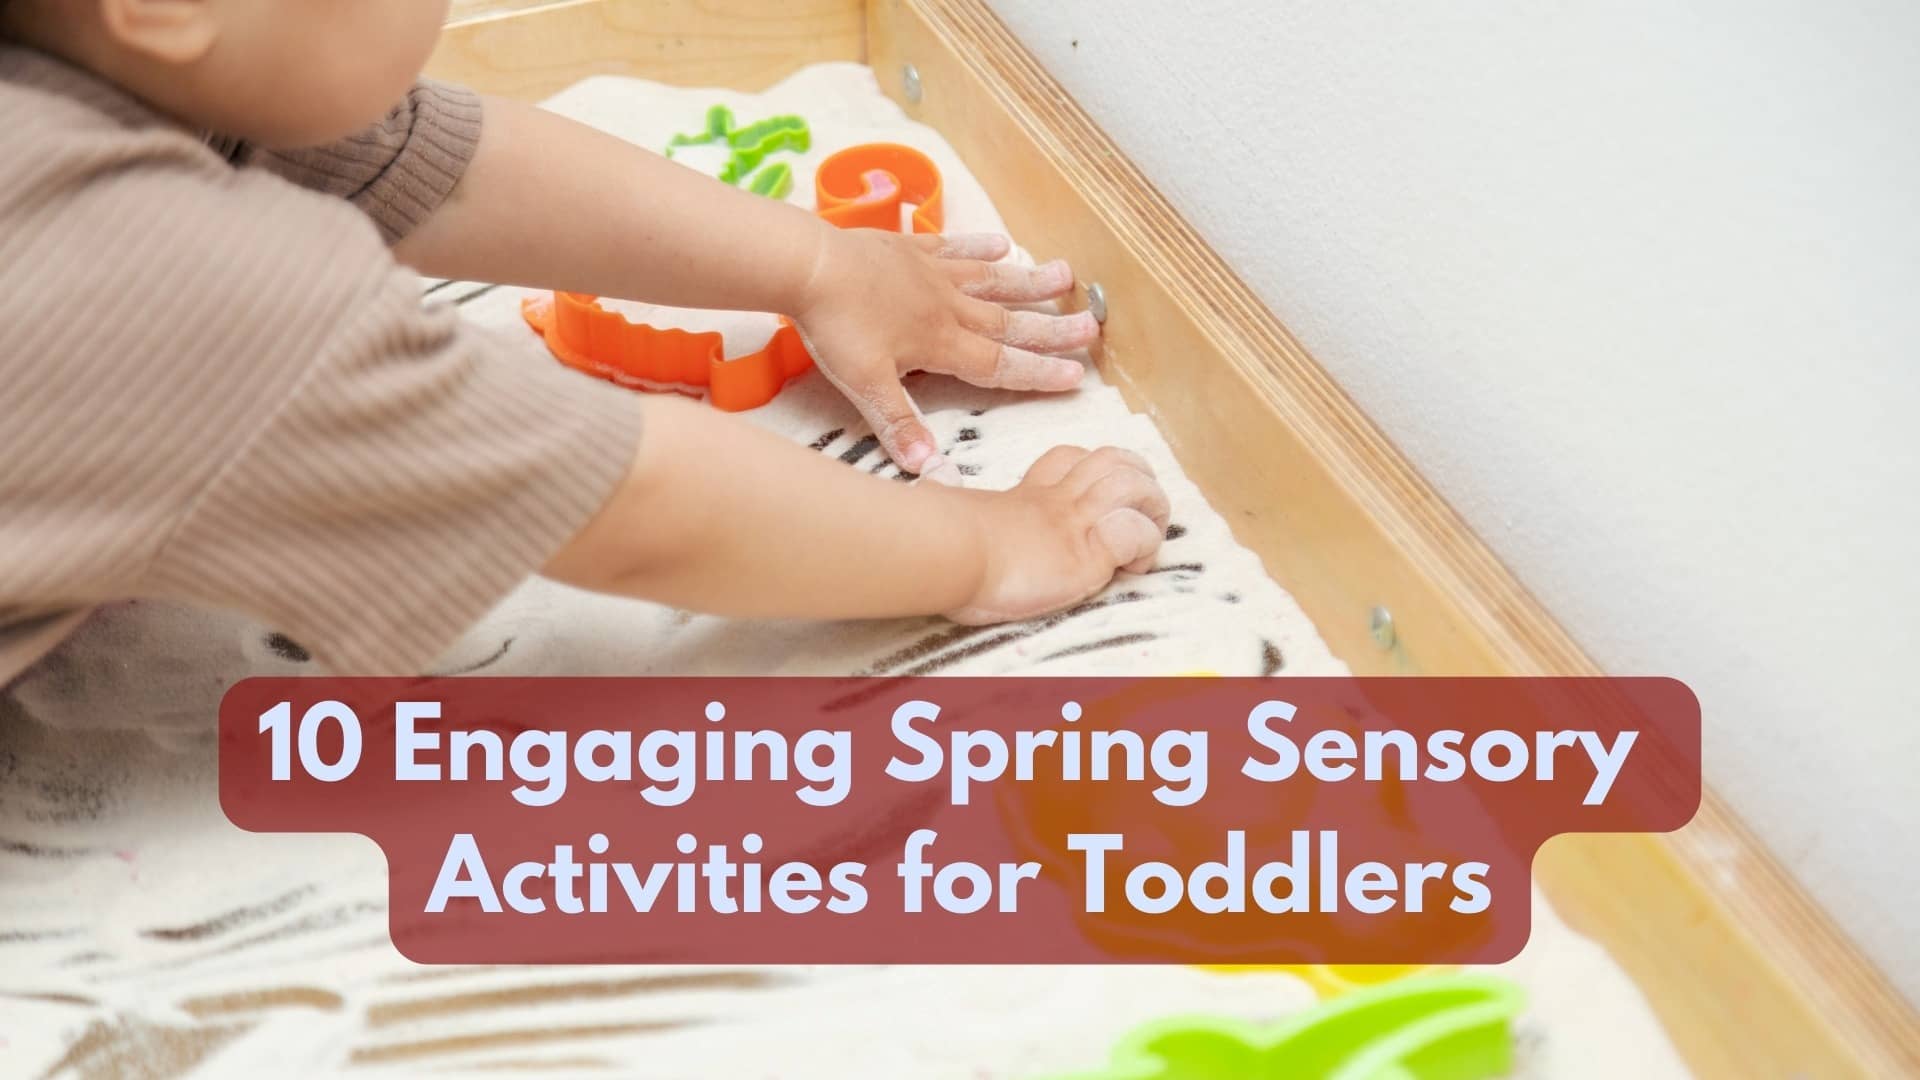 10 Engaging Spring Sensory Activities for Toddlers